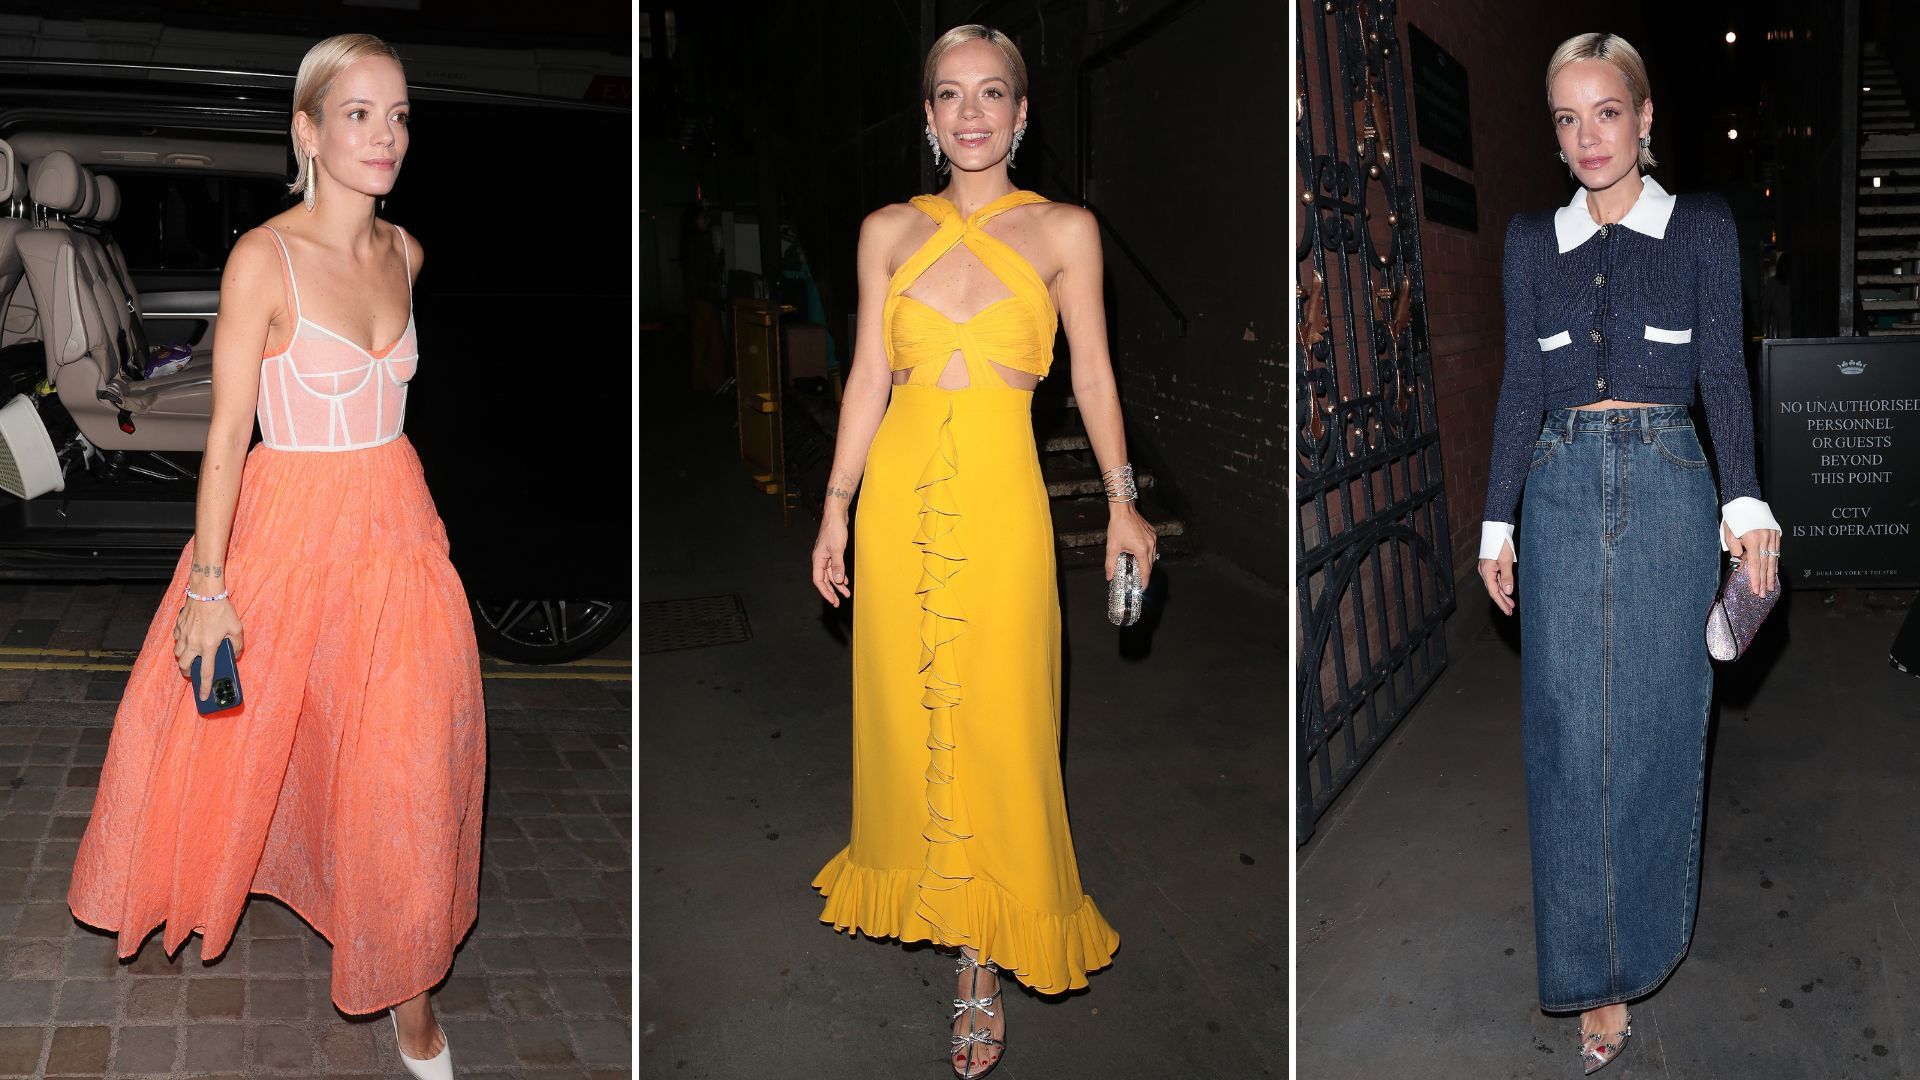 Lily Allen oozes glamour in daring yellow cut-out dress after The Pillowman  performance - see photos